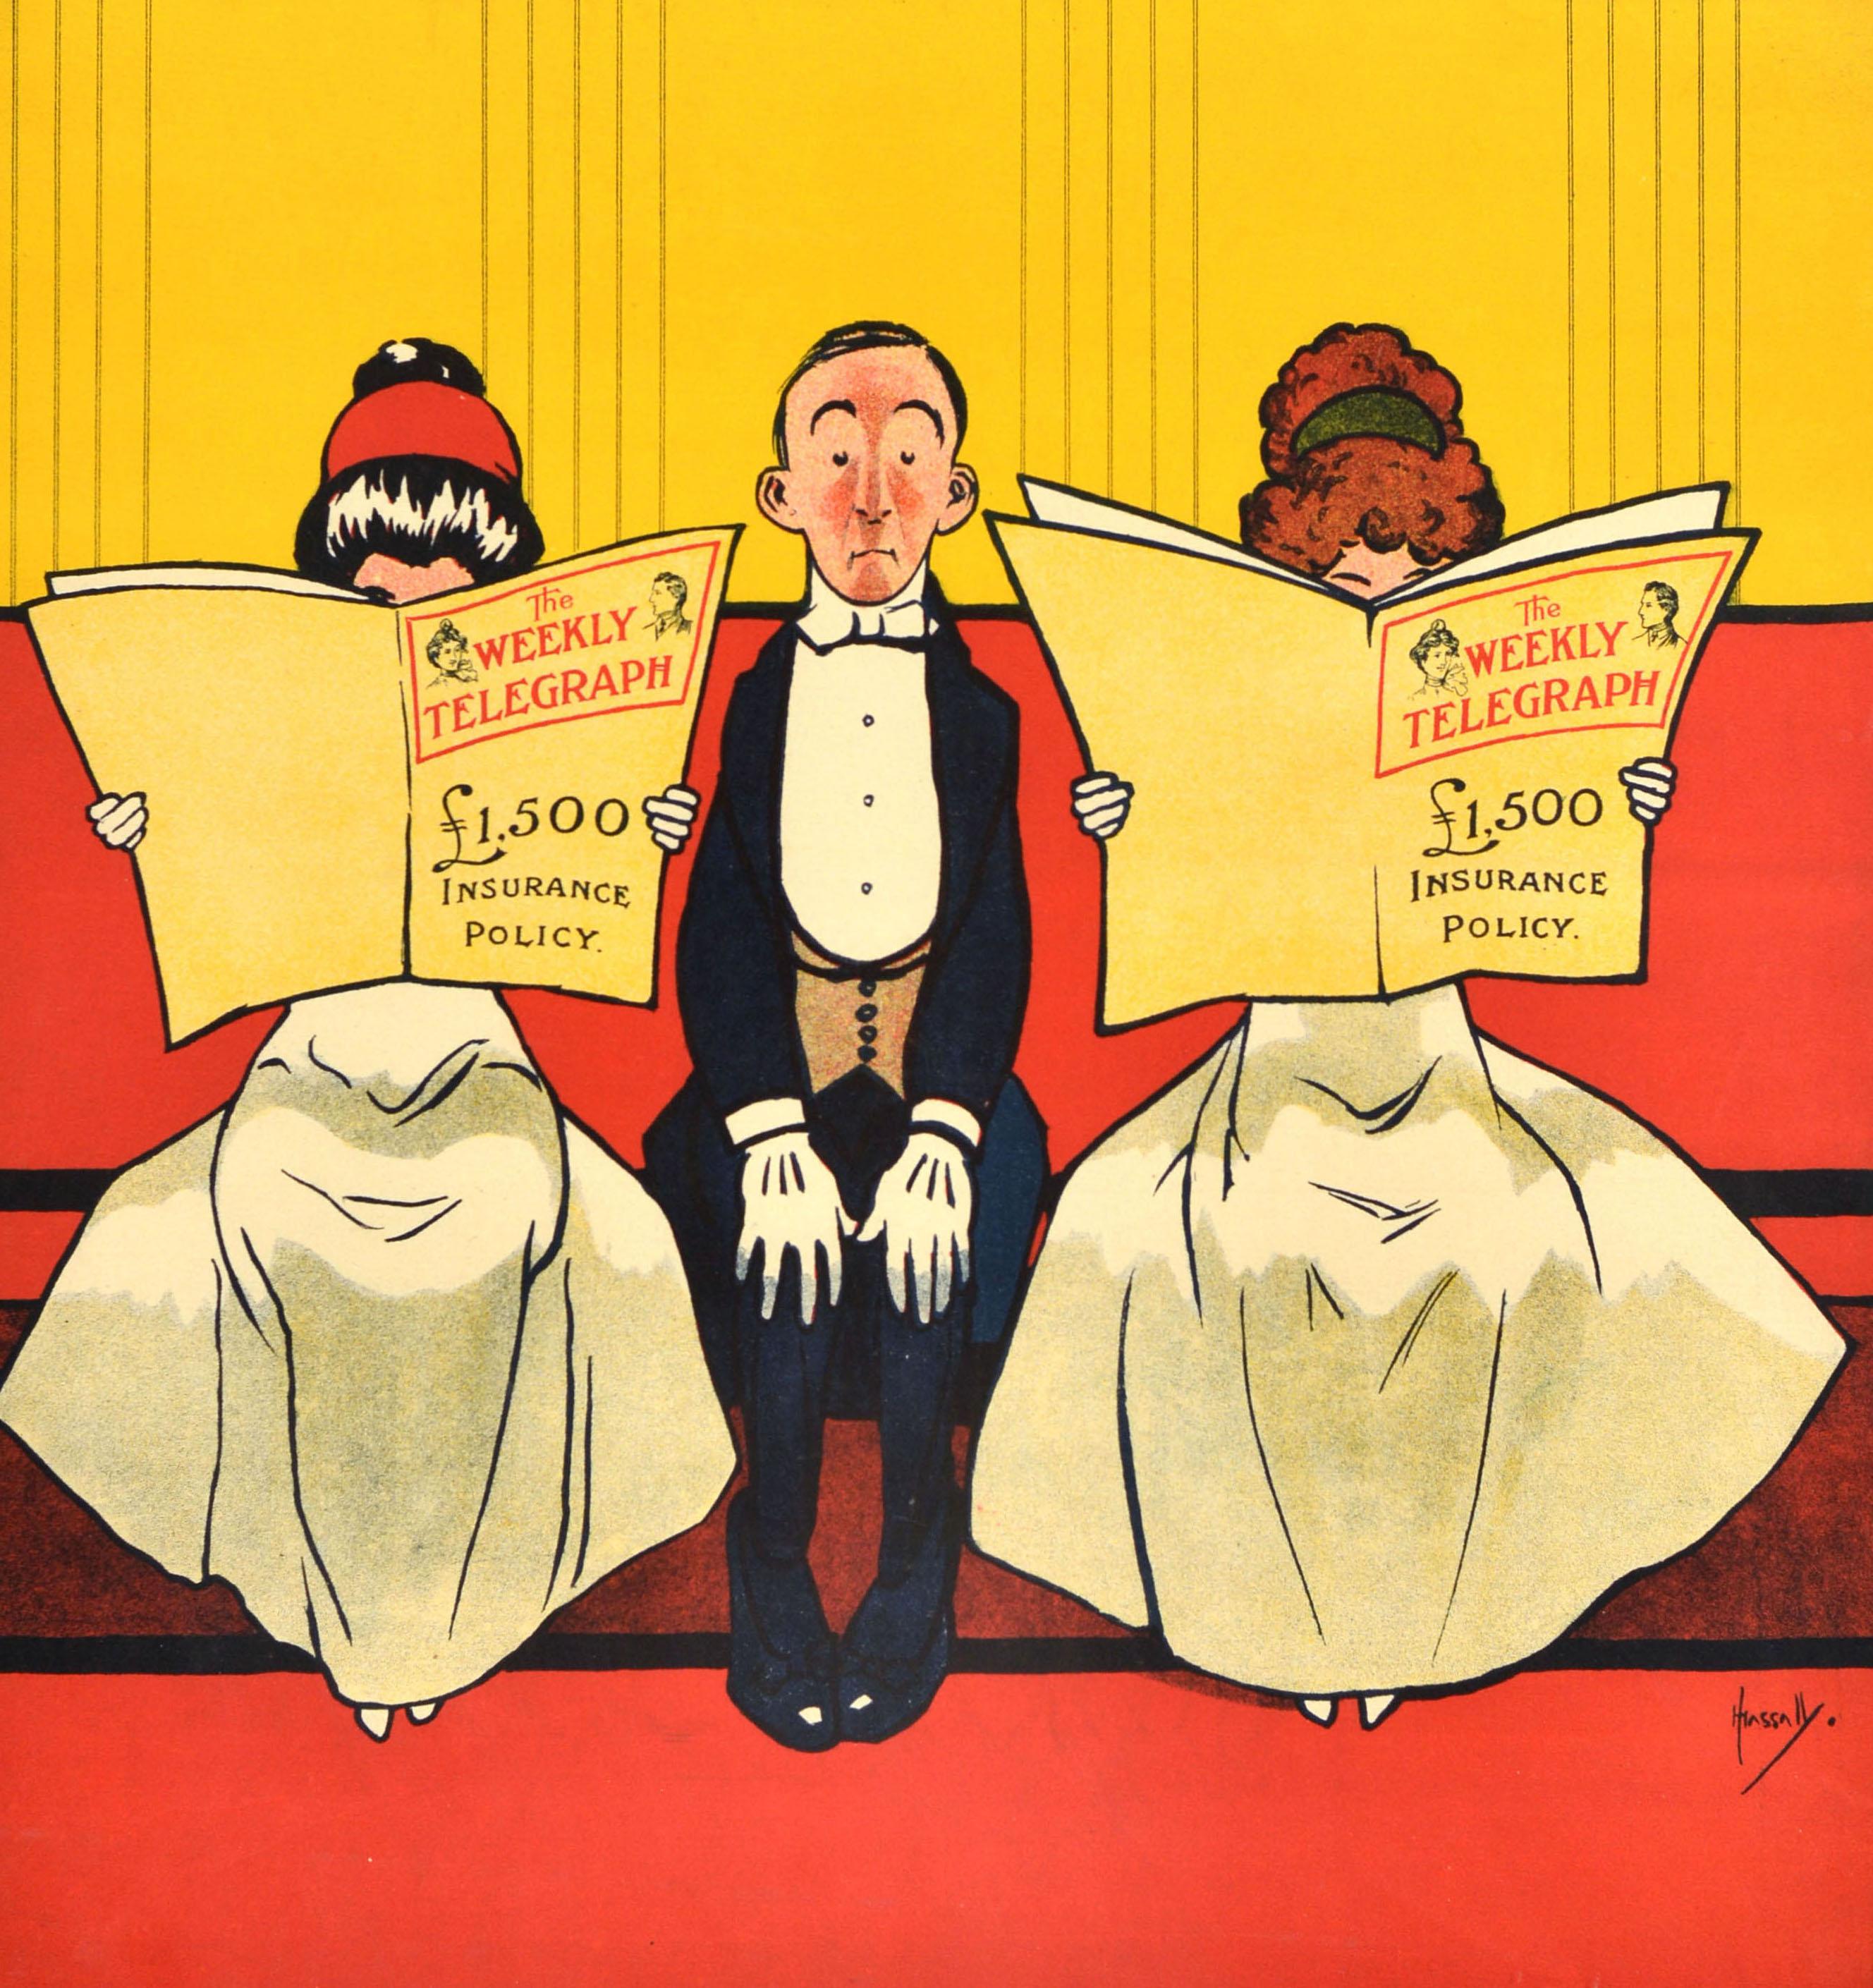 Original antique newspaper advertising poster - The Weekly Telegraph - featuring a fun and colourful illustration by the notable artist John Hassall (1868-1948) of a gentleman in a smart suit and white gloves sitting between two ladies in white